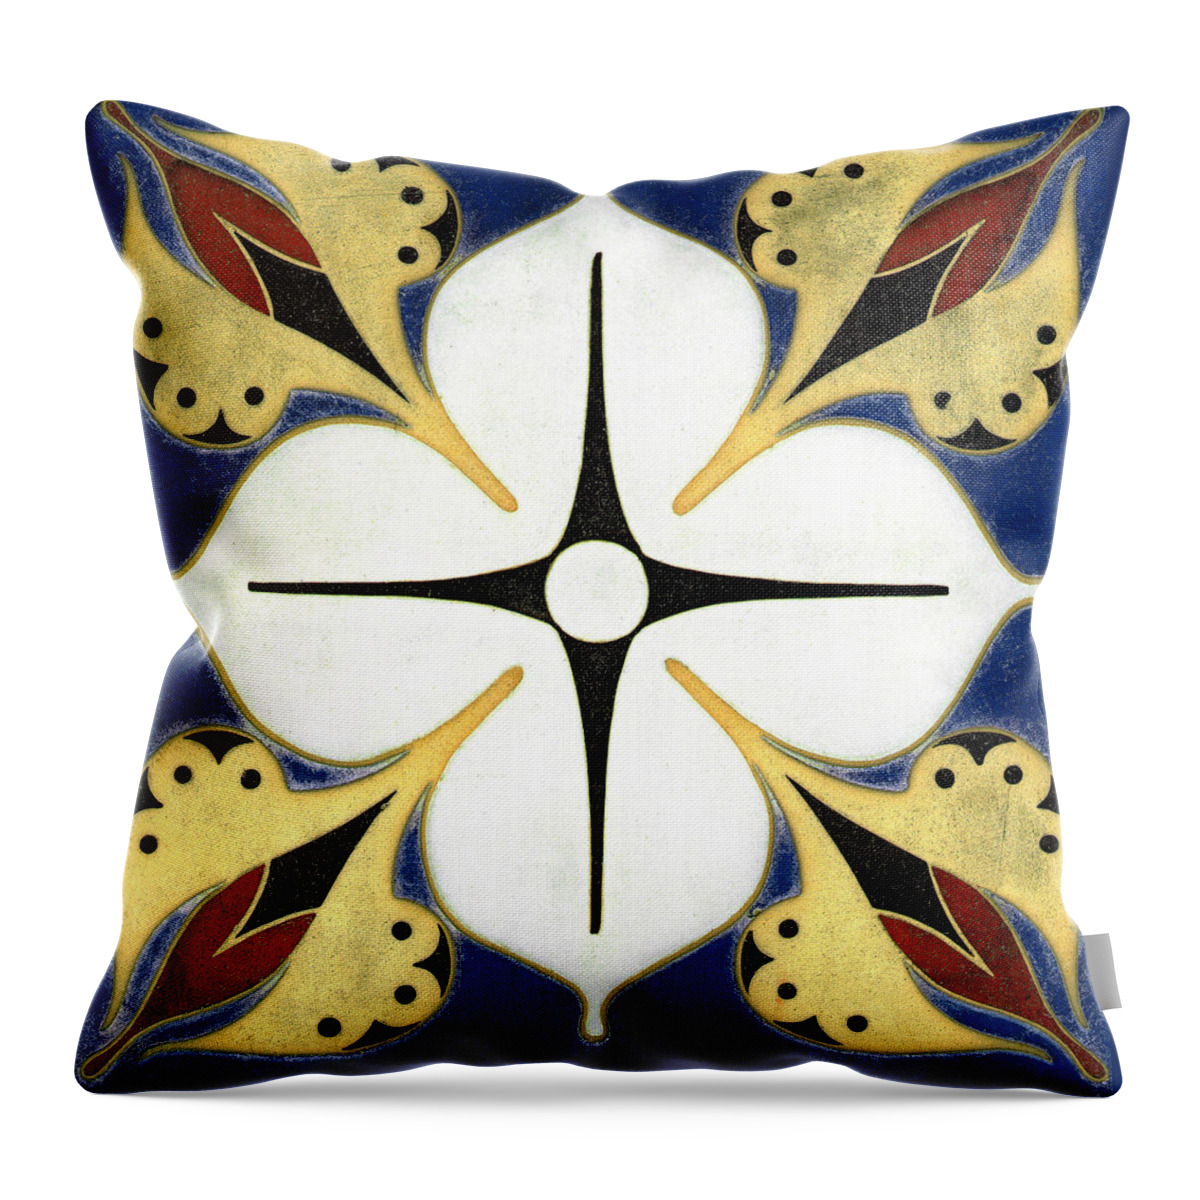 Furness Throw Pillow featuring the ceramic art Guarantee Trust Company exterior tile by Frank Furness